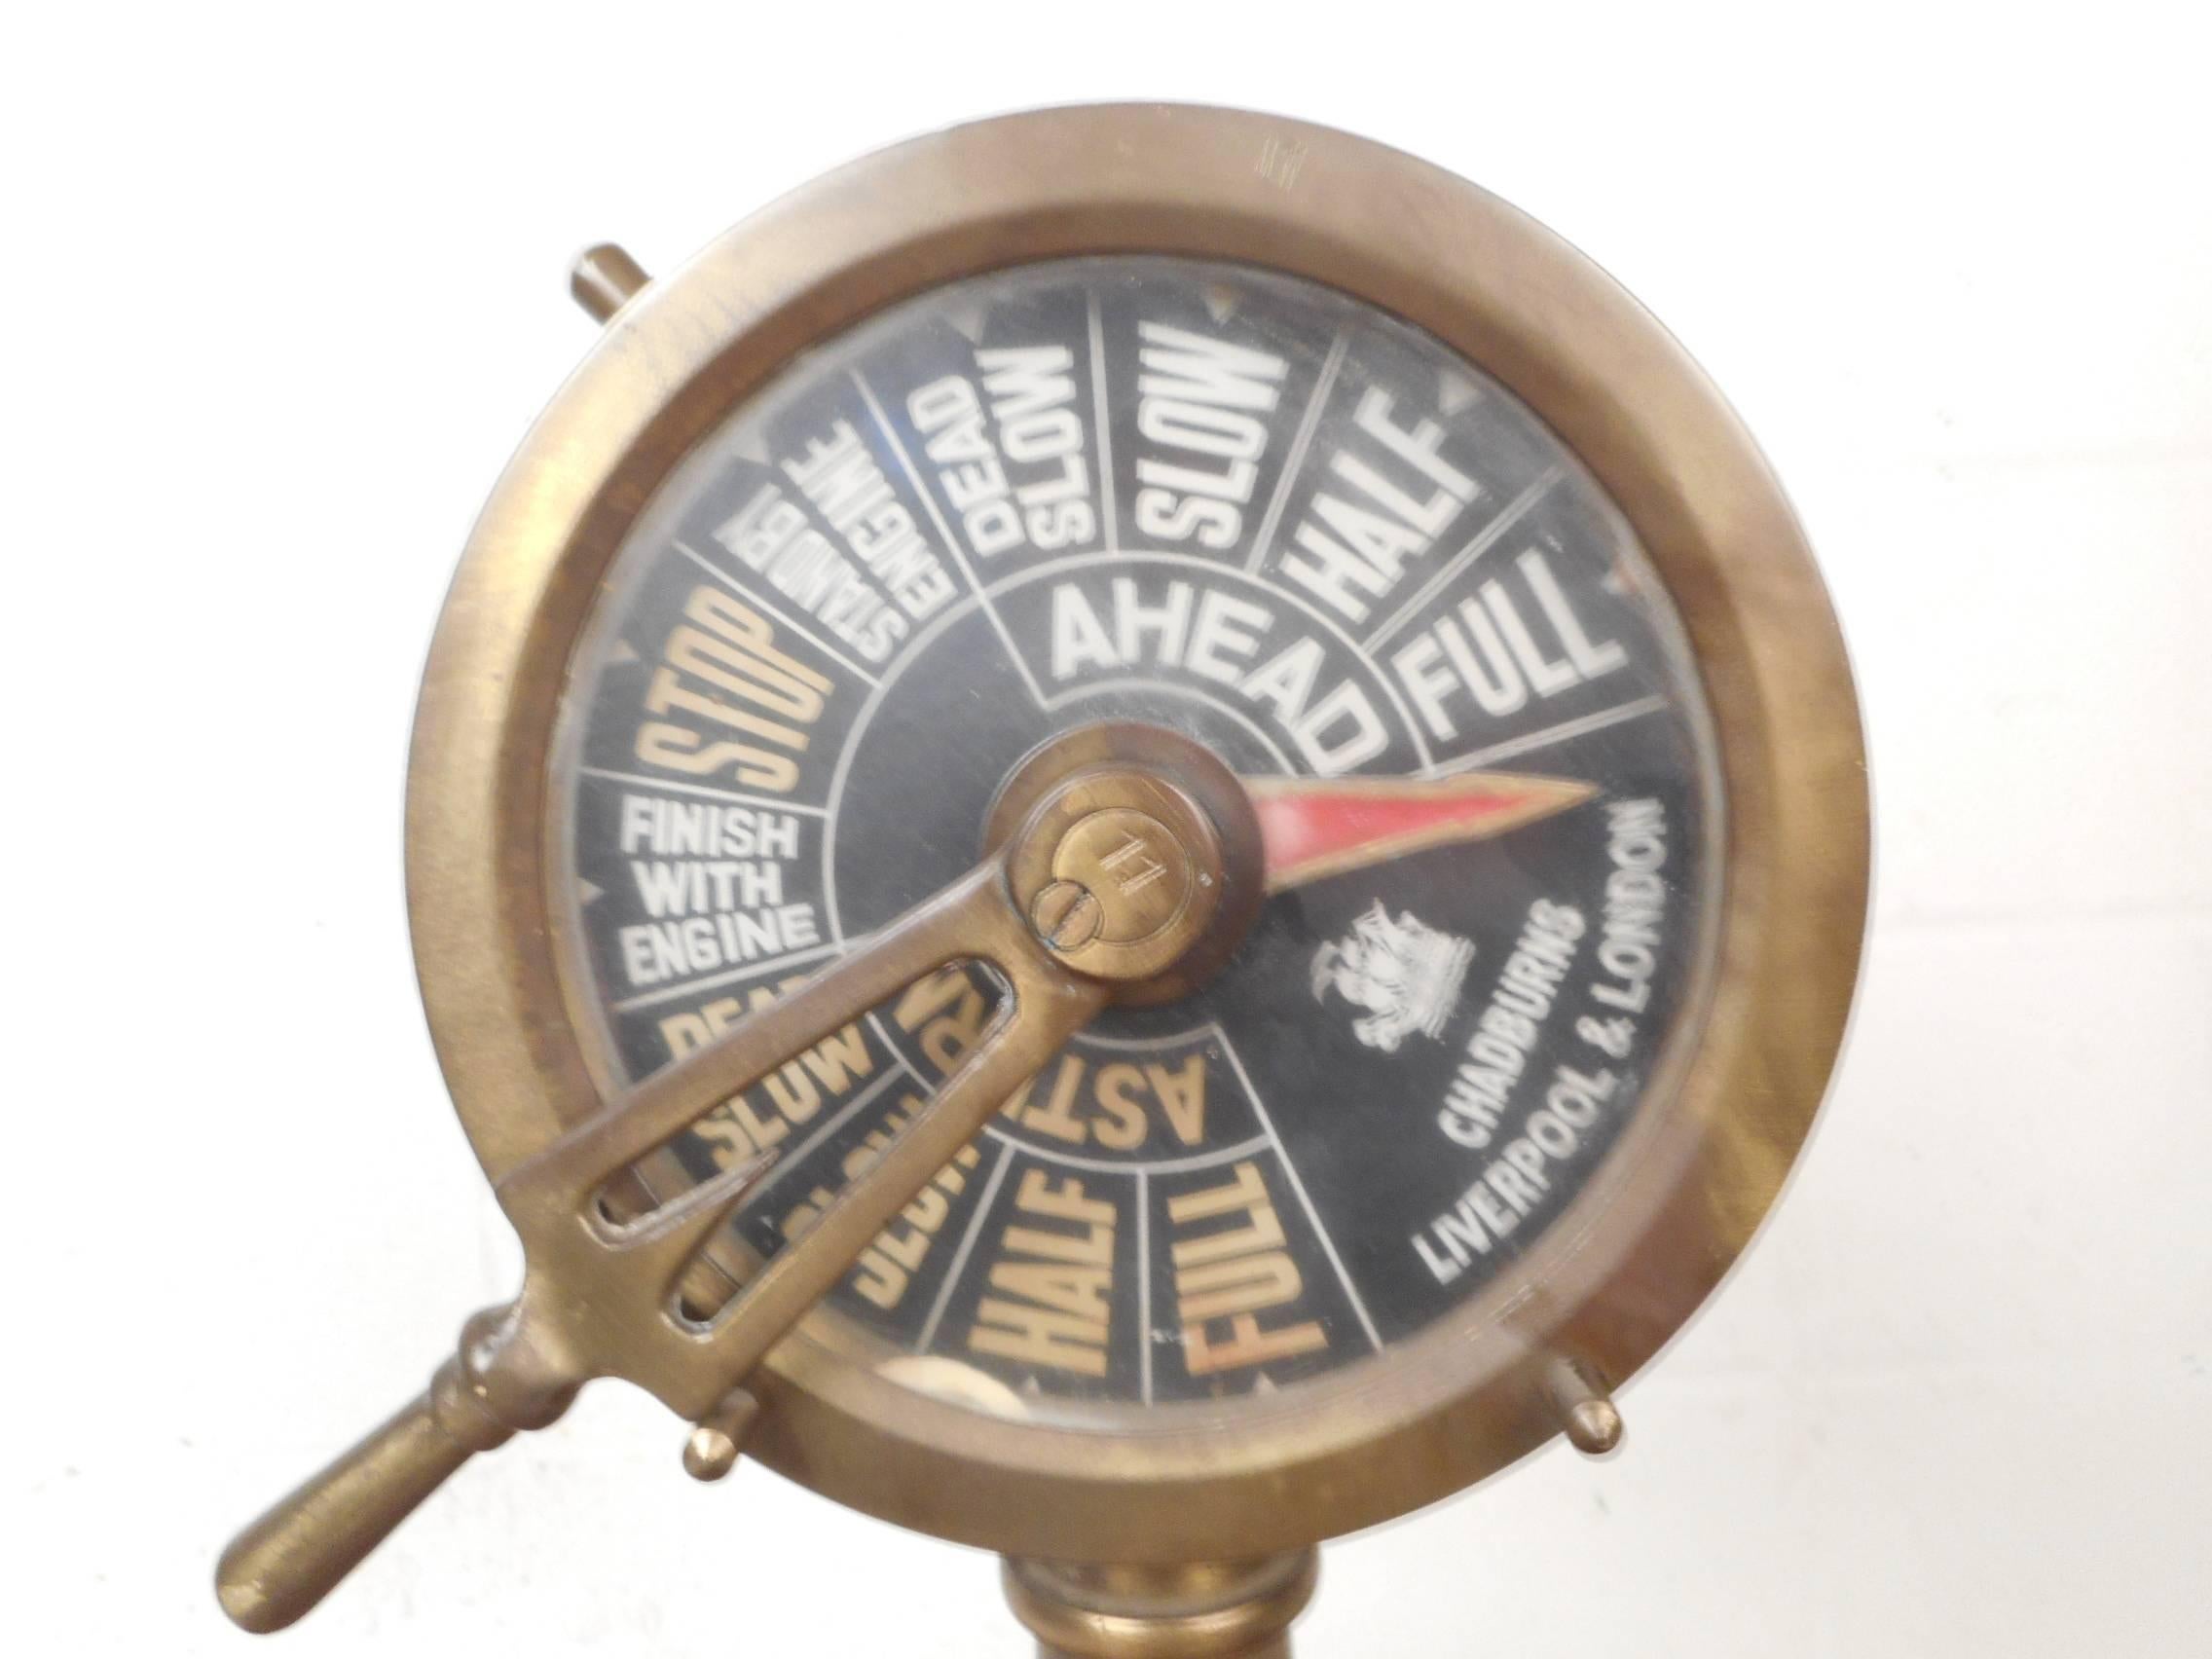 This wonderful vintage ship telegraph makes the perfect decorative piece in any home. This beautiful nautical piece still has a working chime when you turn the handle. A glass face and a solid brass frame show quality design. This lovely piece has